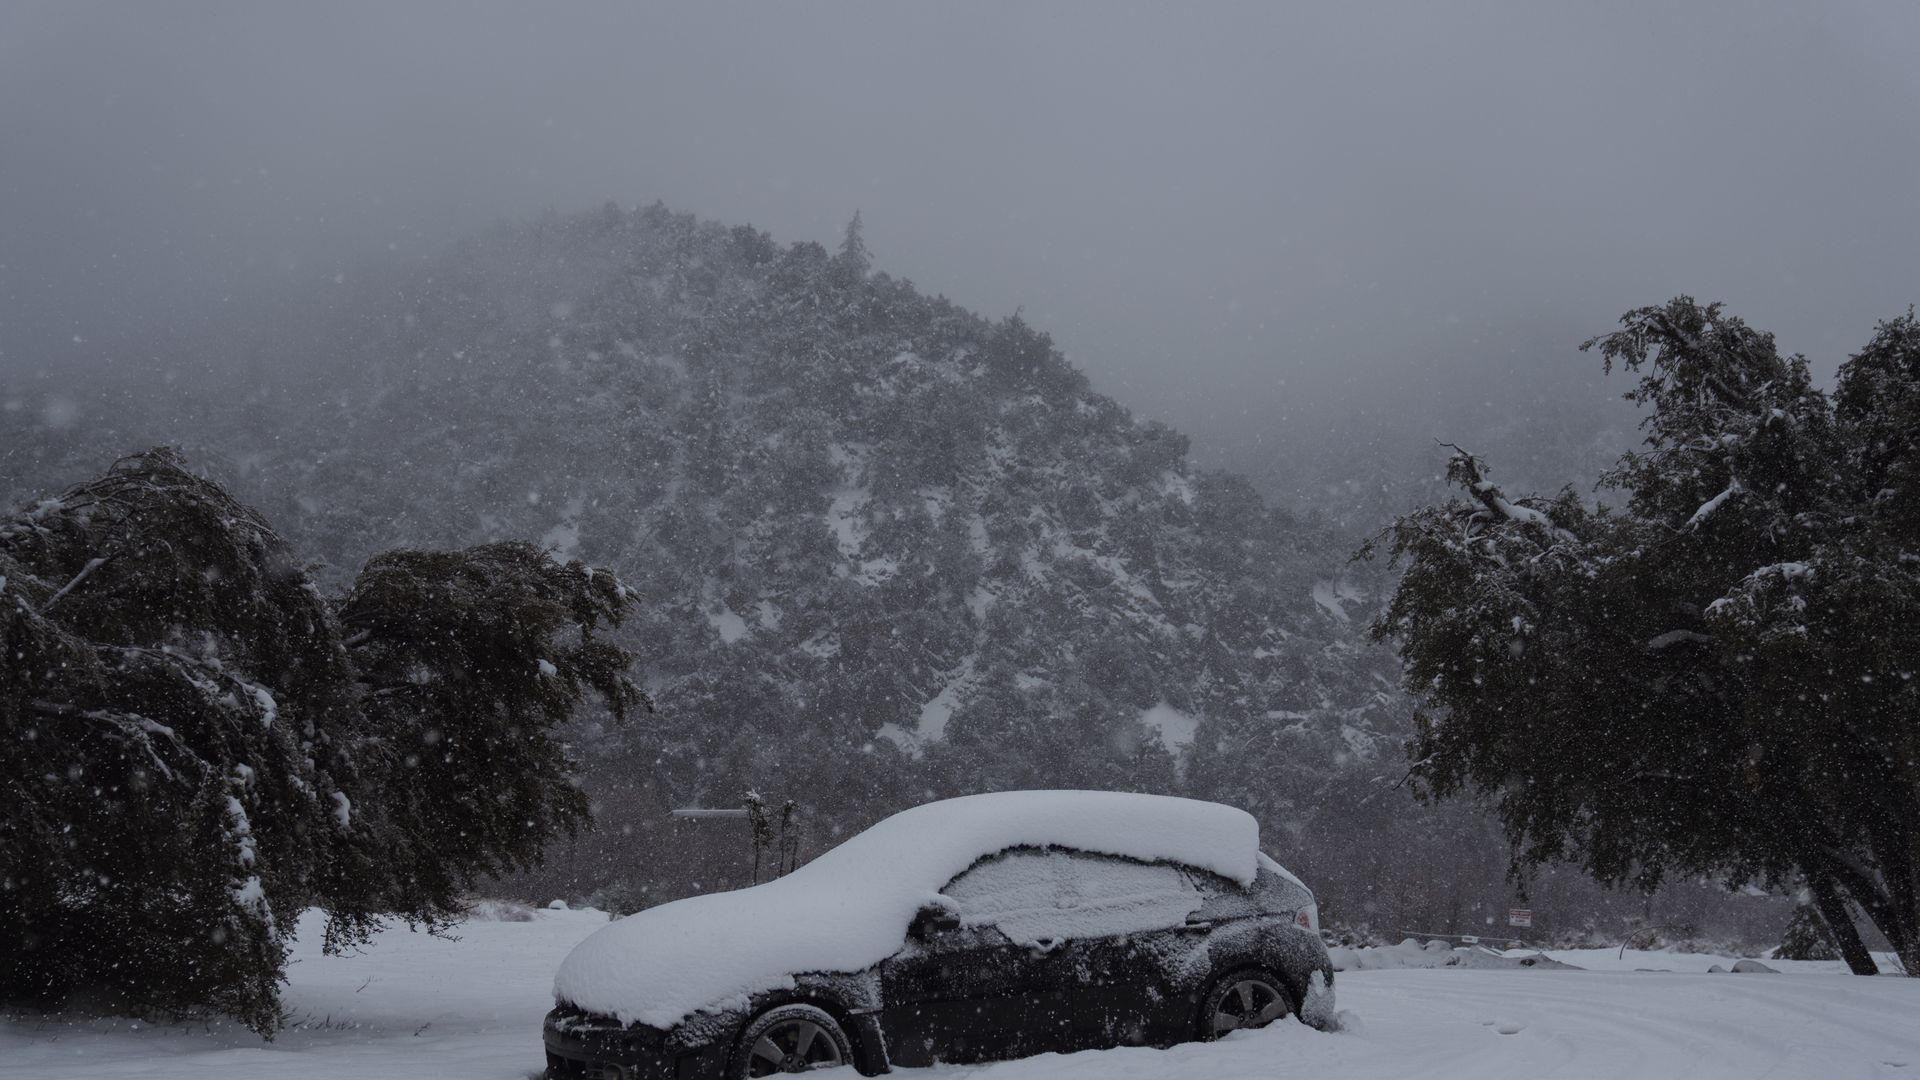 Car with heavy snow on top during a rare California blizzard.